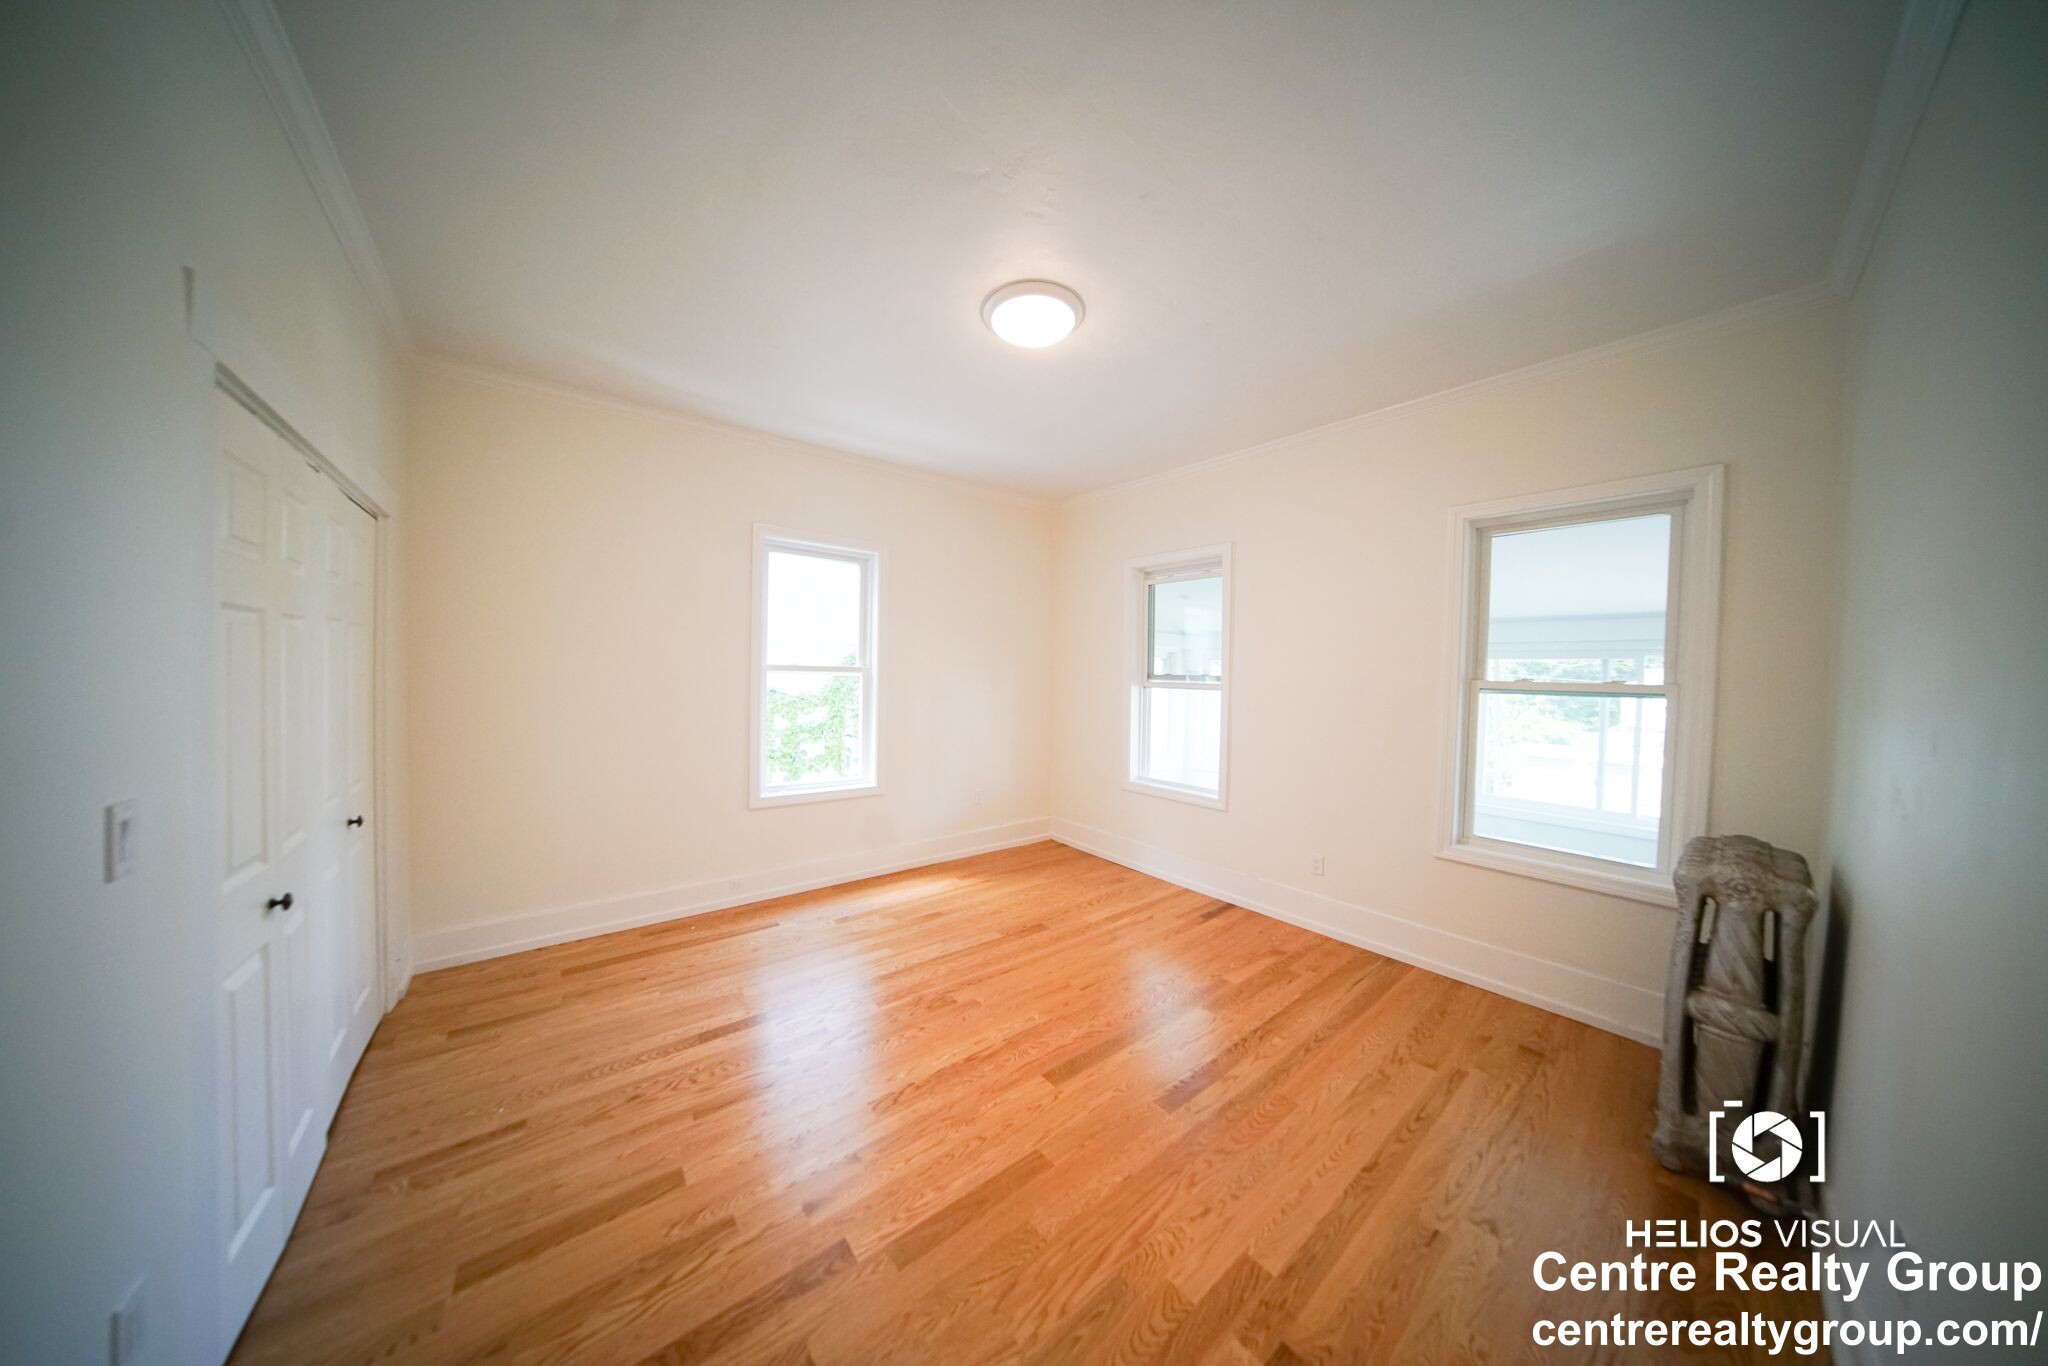 Photos of apartment on Sunset Rd.,Somerville MA 02144